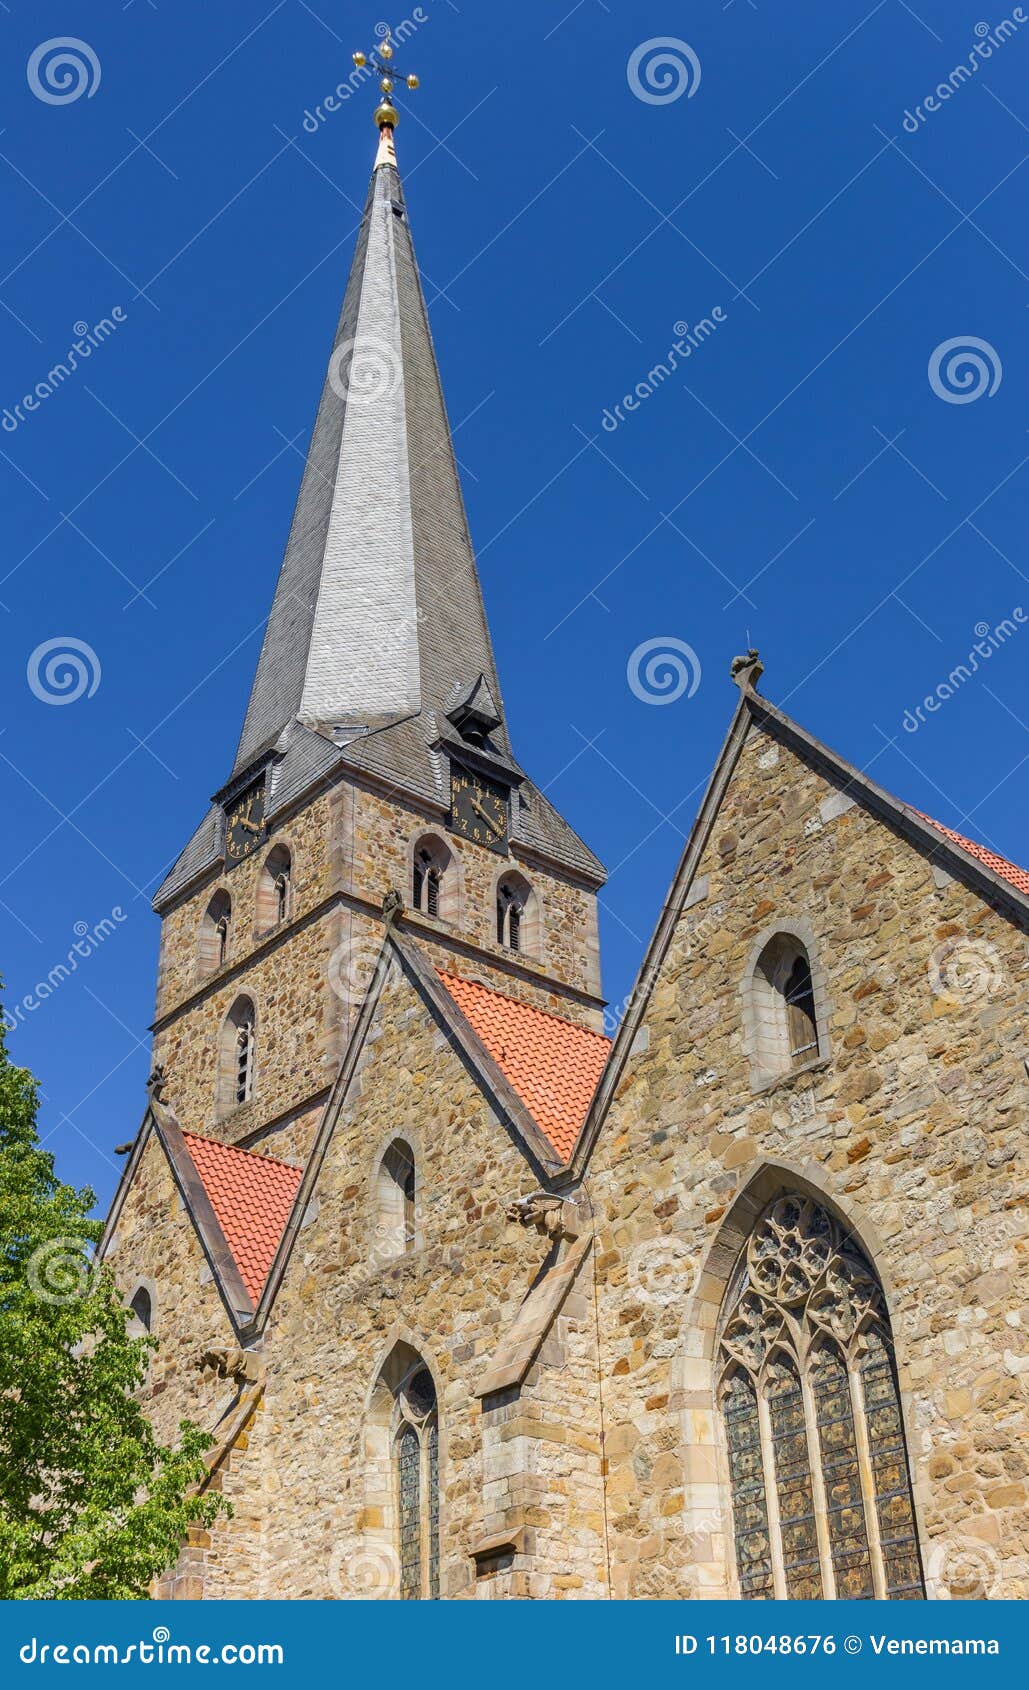 tower of the historic johannis church in herford